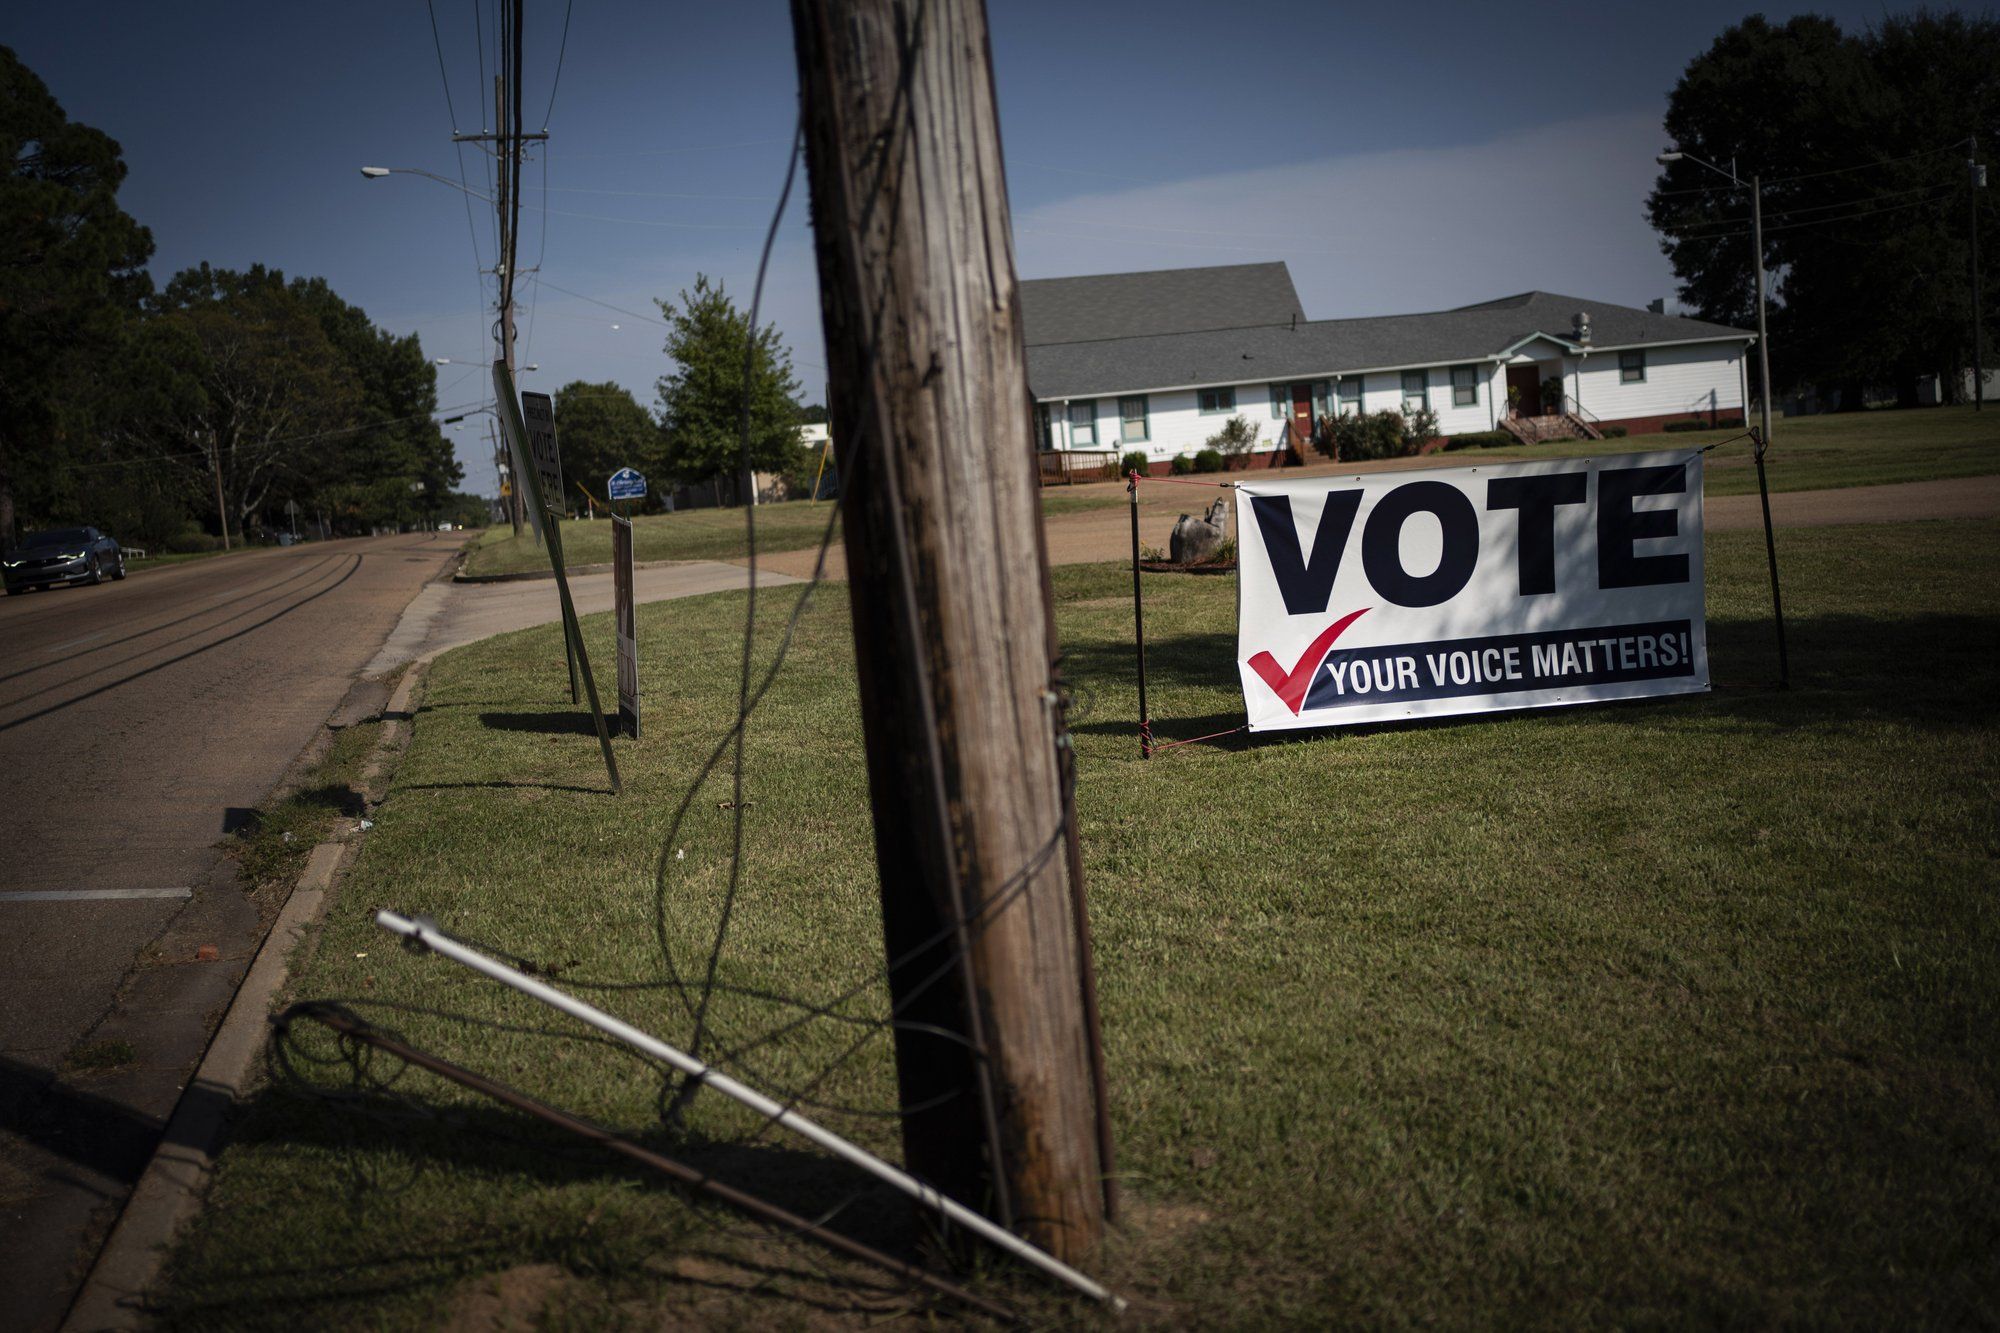 A banner urging citizens to vote is displayed on the side of a street in Jackson Miss. Image by Wong Maye-E / The Associated Press.